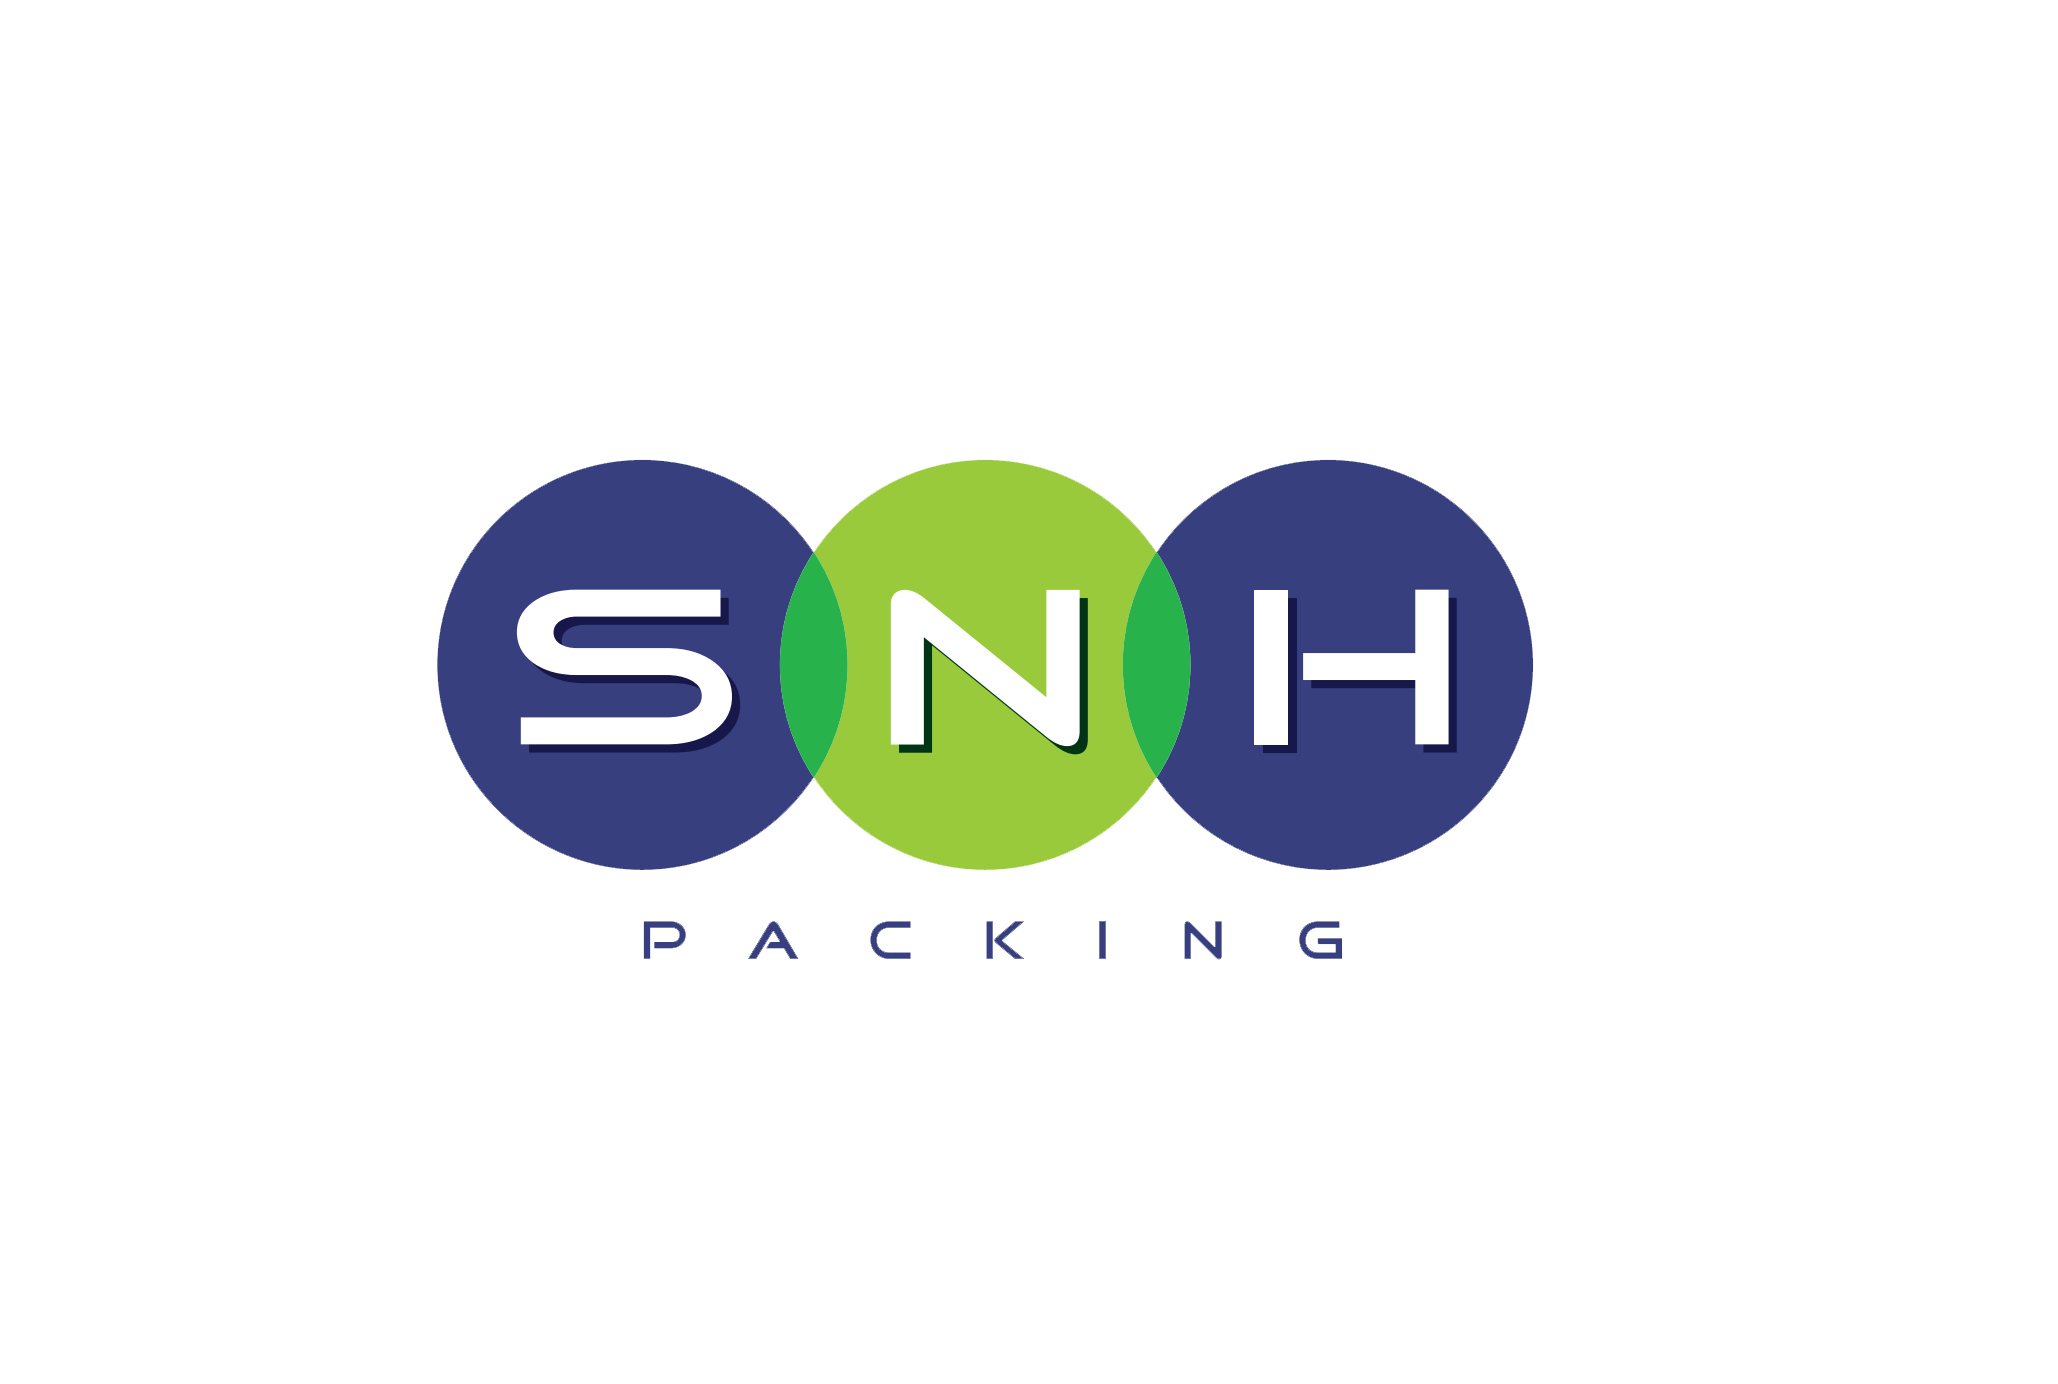 SNH PACKING